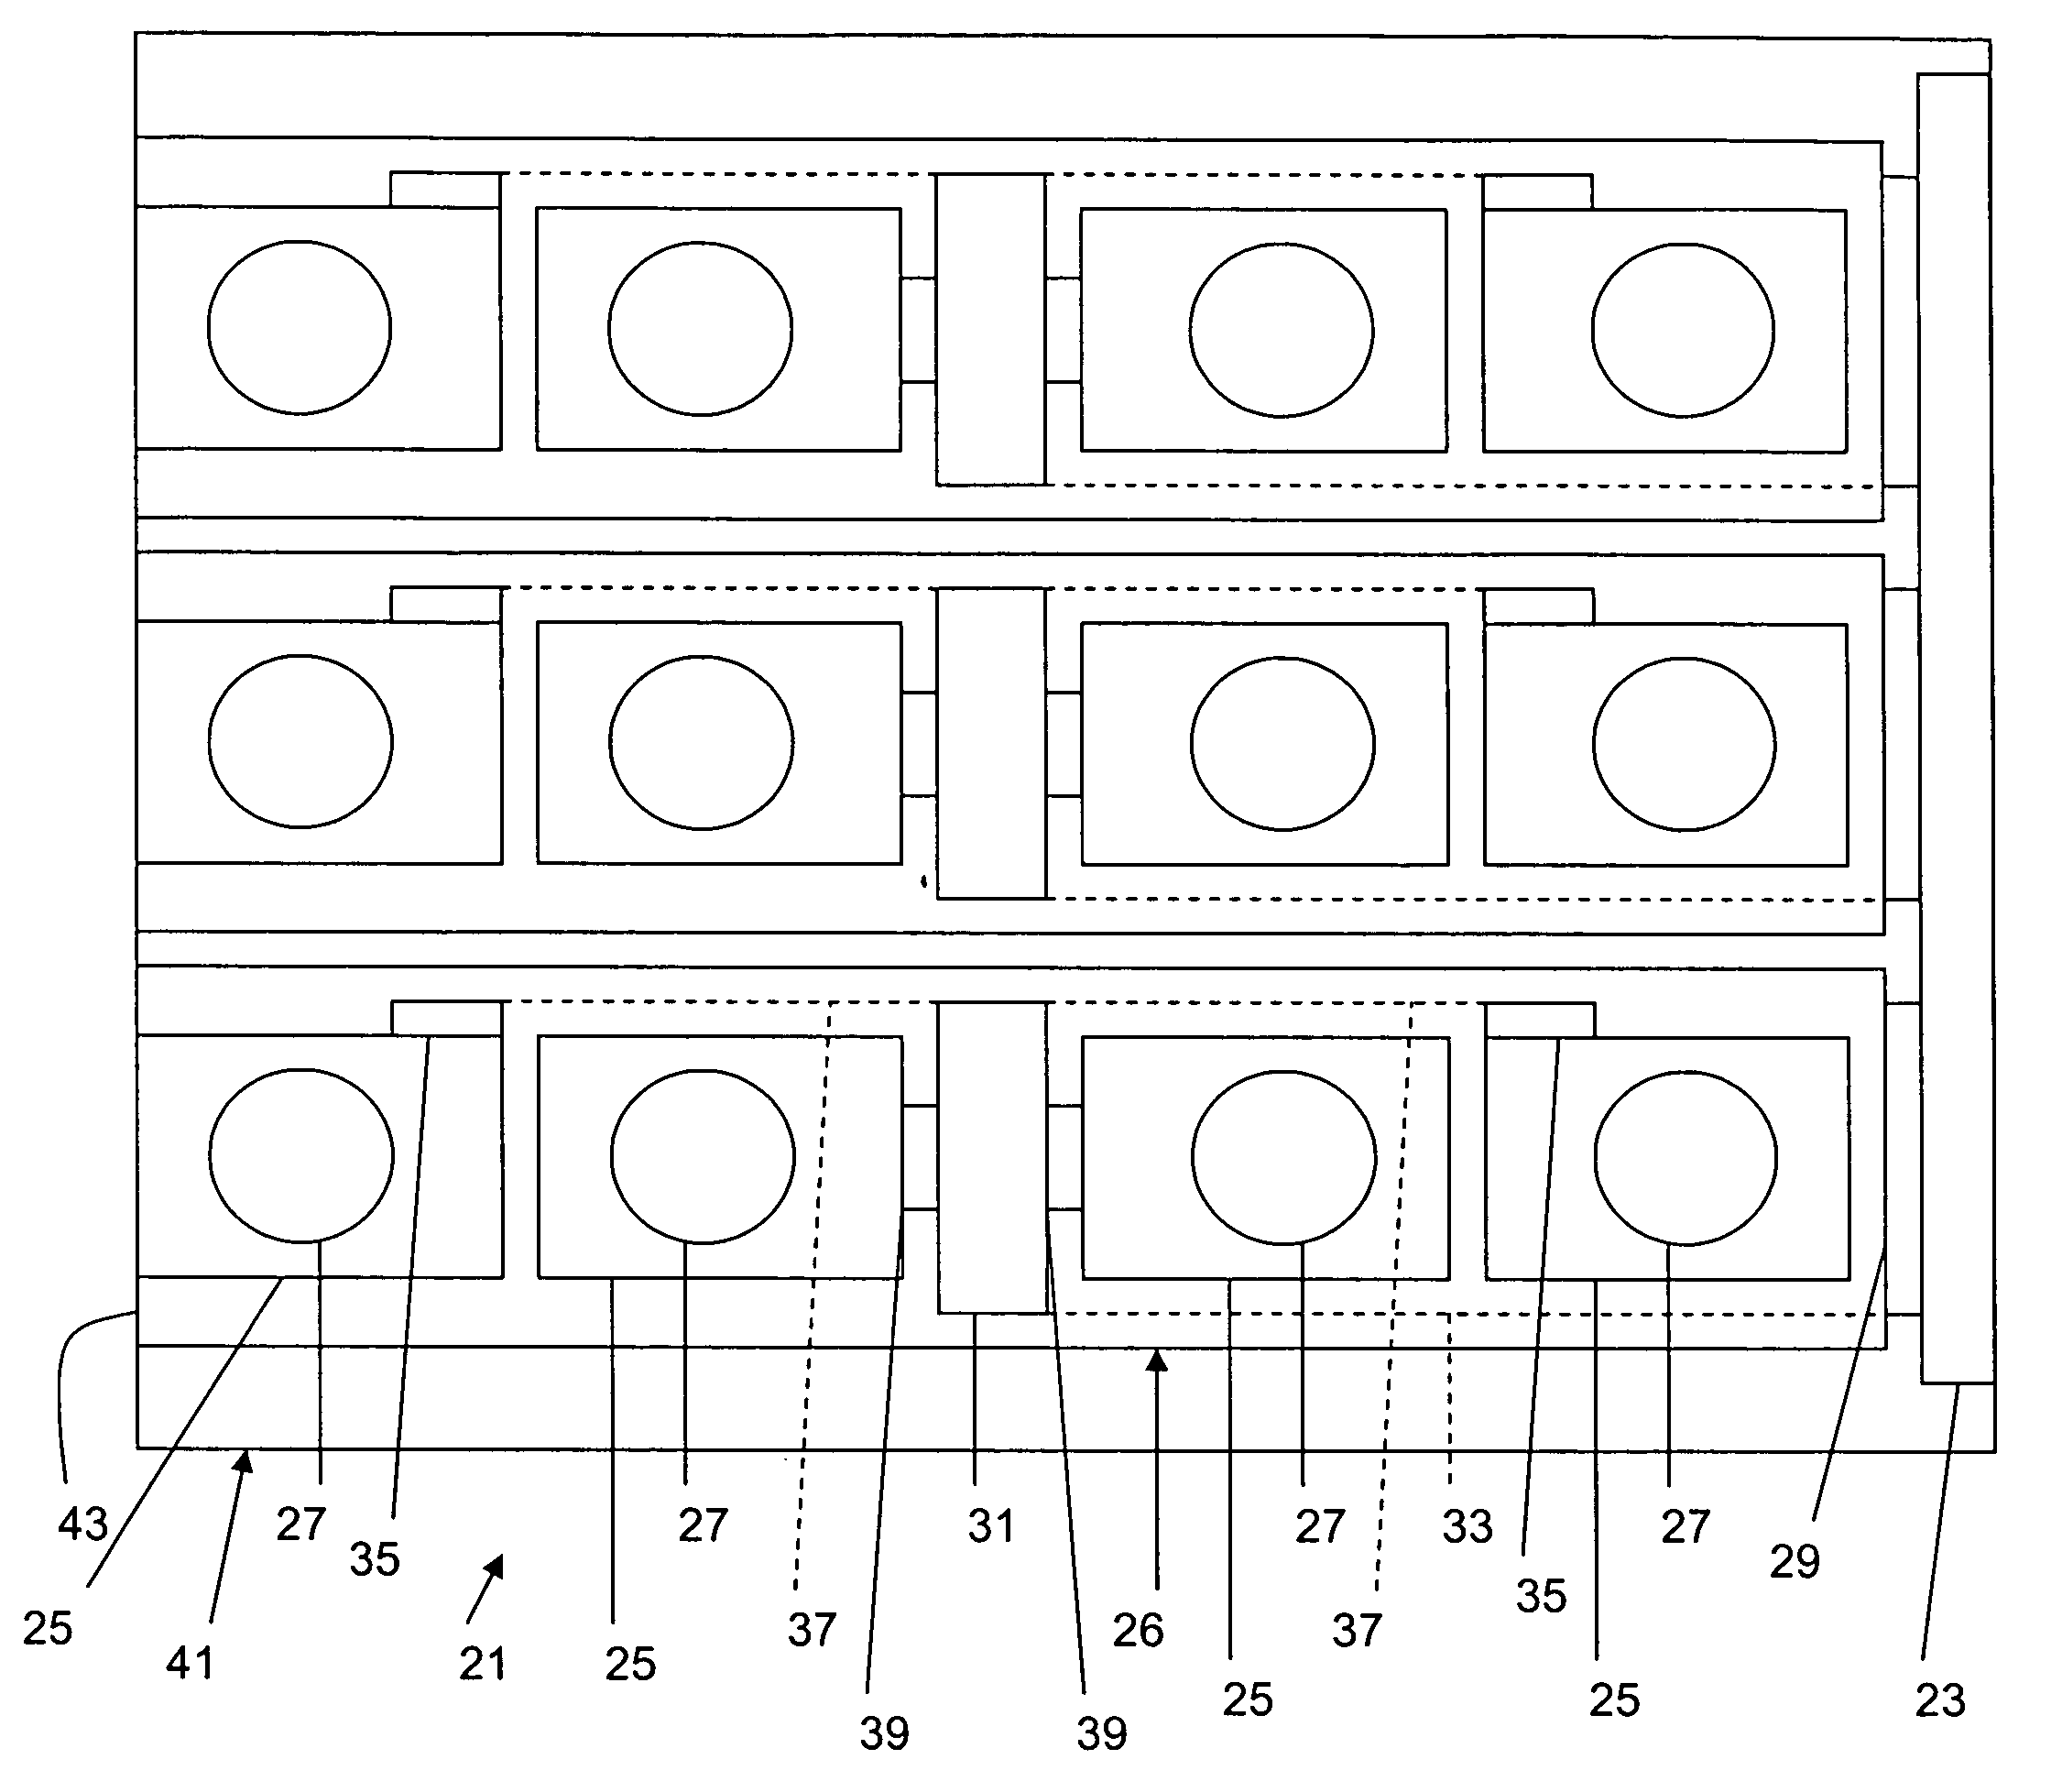 Storage component of a server arrangement with a plurality of hard disk drives